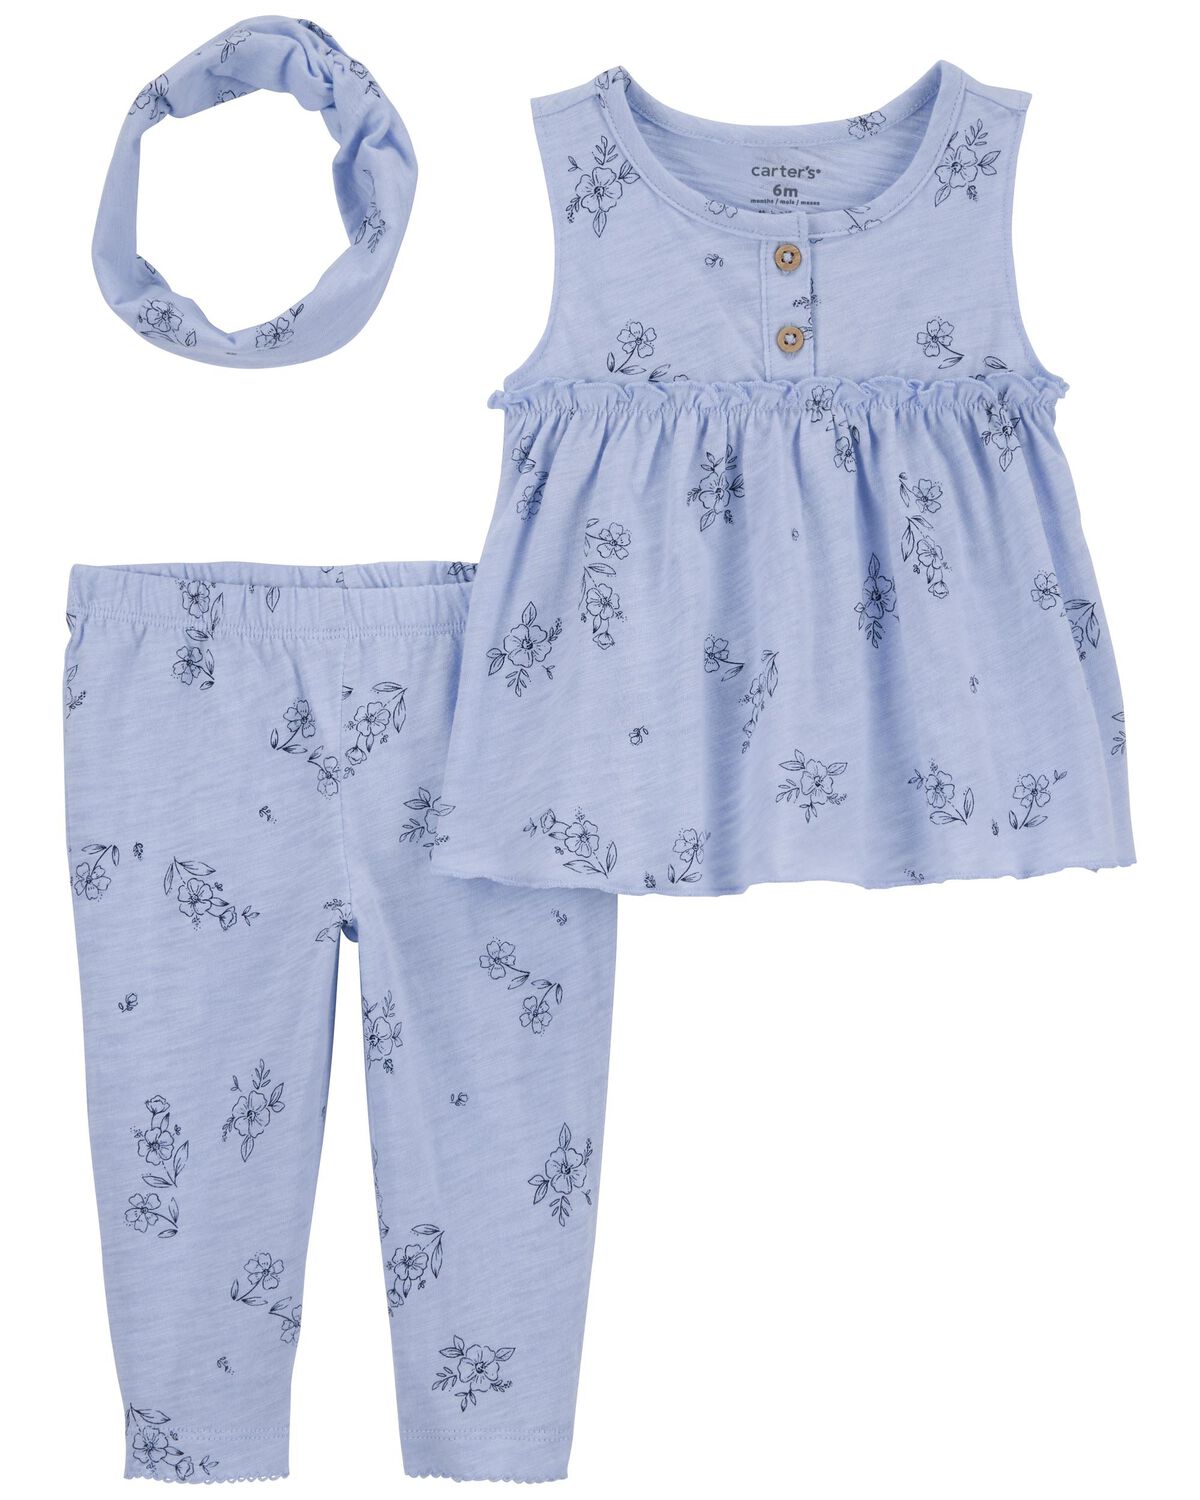 Baby 3-Piece Floral Little Outfit Set